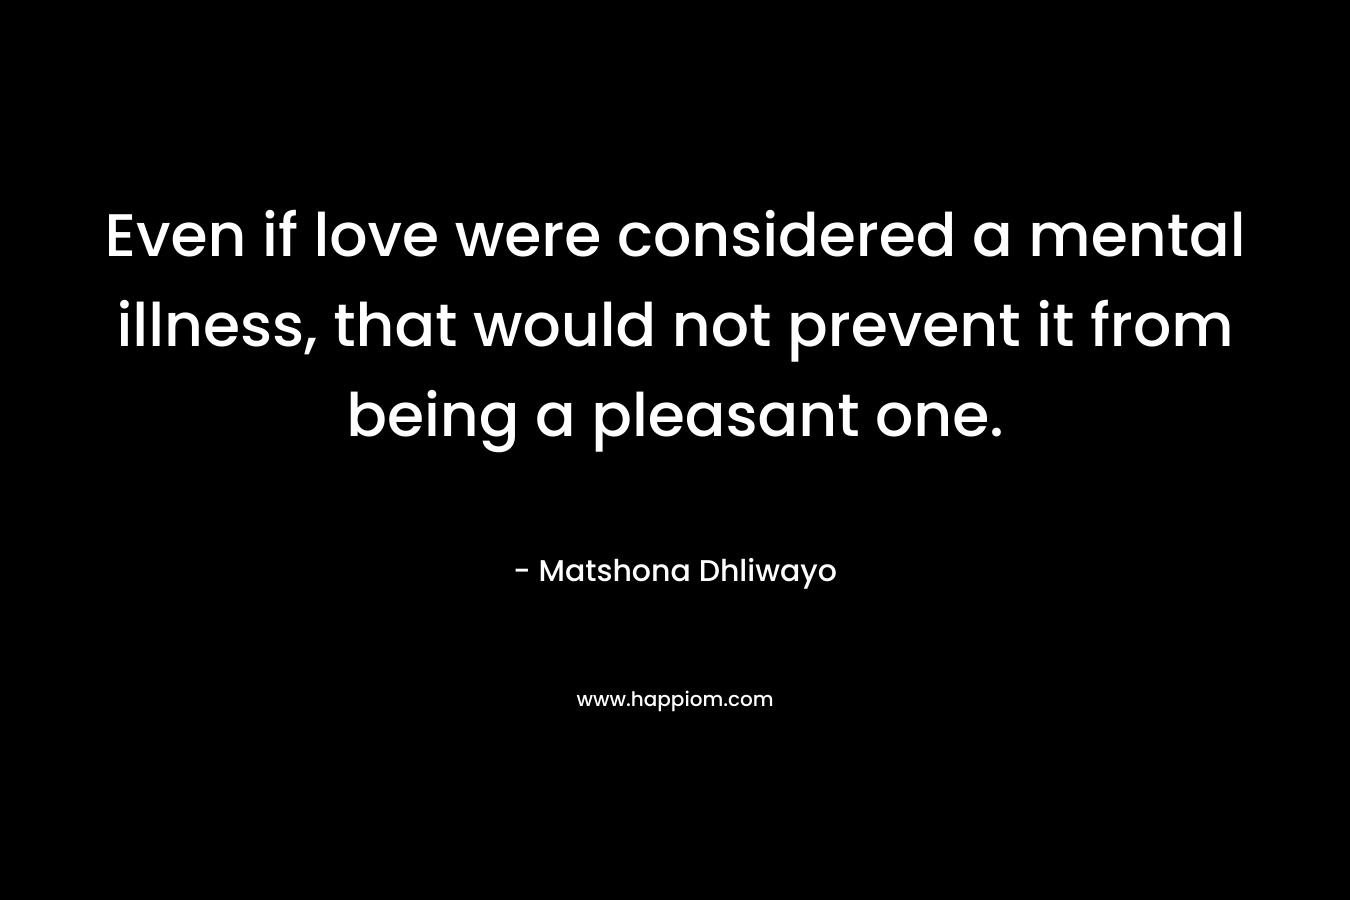 Even if love were considered a mental illness, that would not prevent it from being a pleasant one.